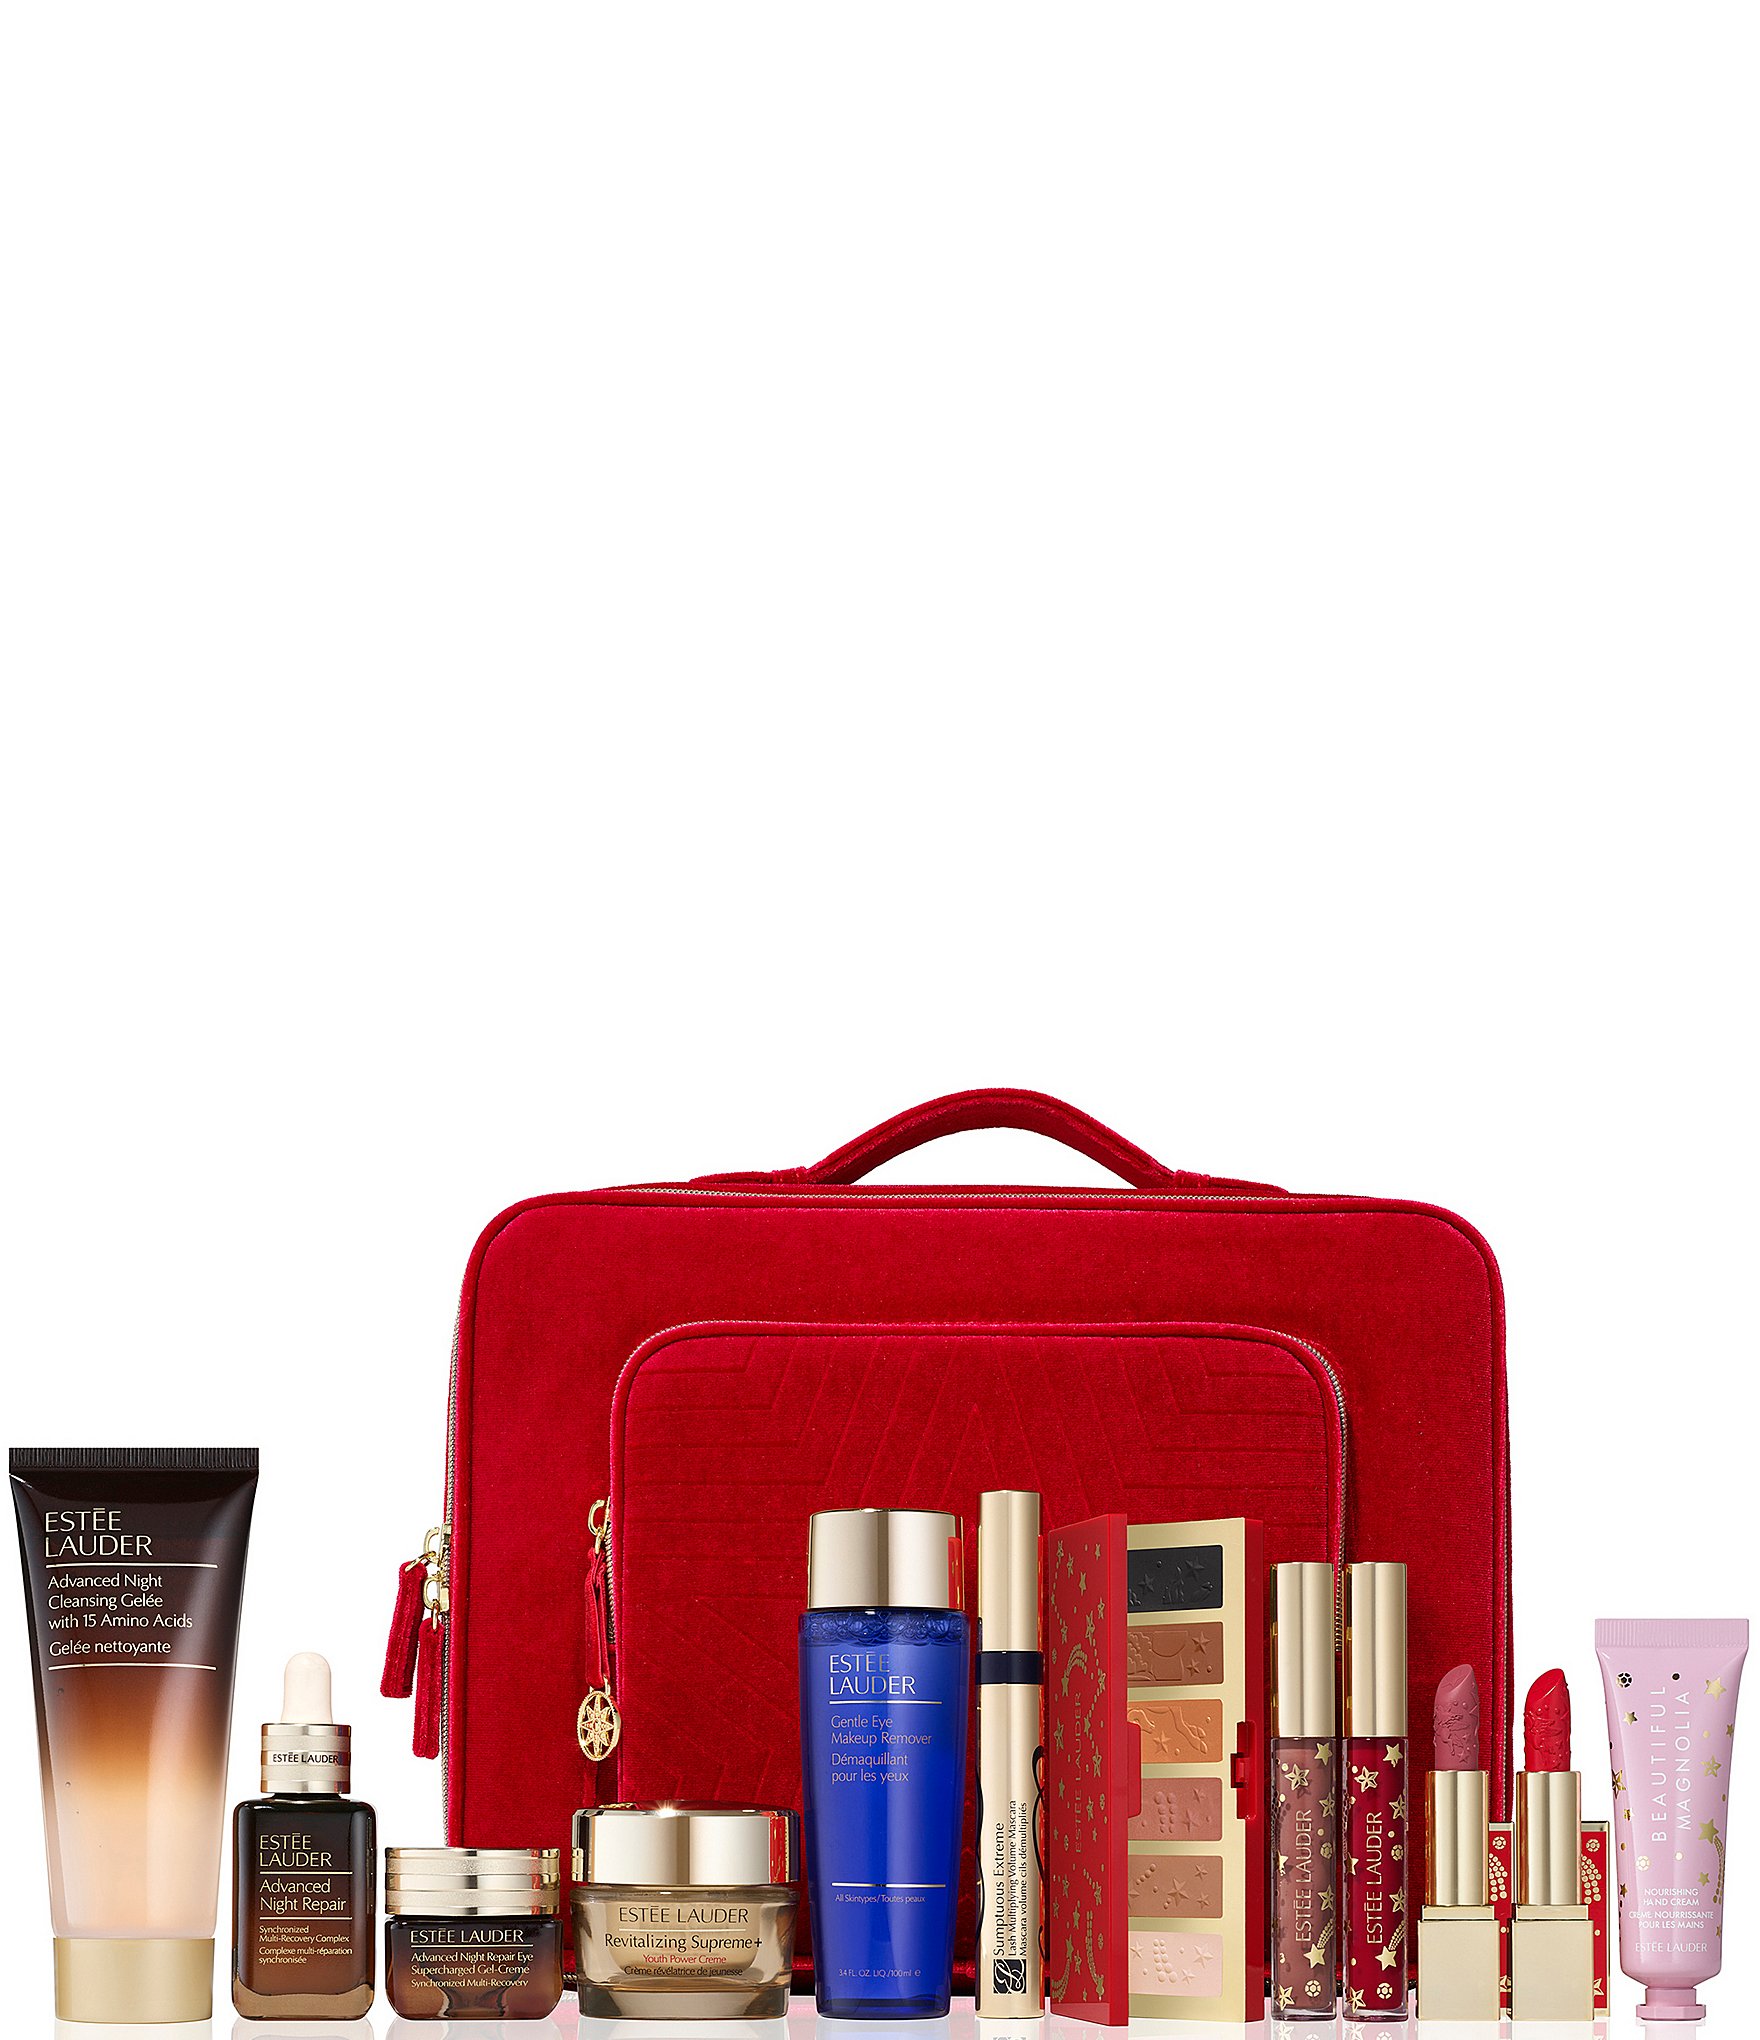 Estee Lauder Holiday Blockbuster Celestial GLOW 11 Full Sizes + More $85  with any Estee Lauder Purchase, a $615 Value! | Dillard's